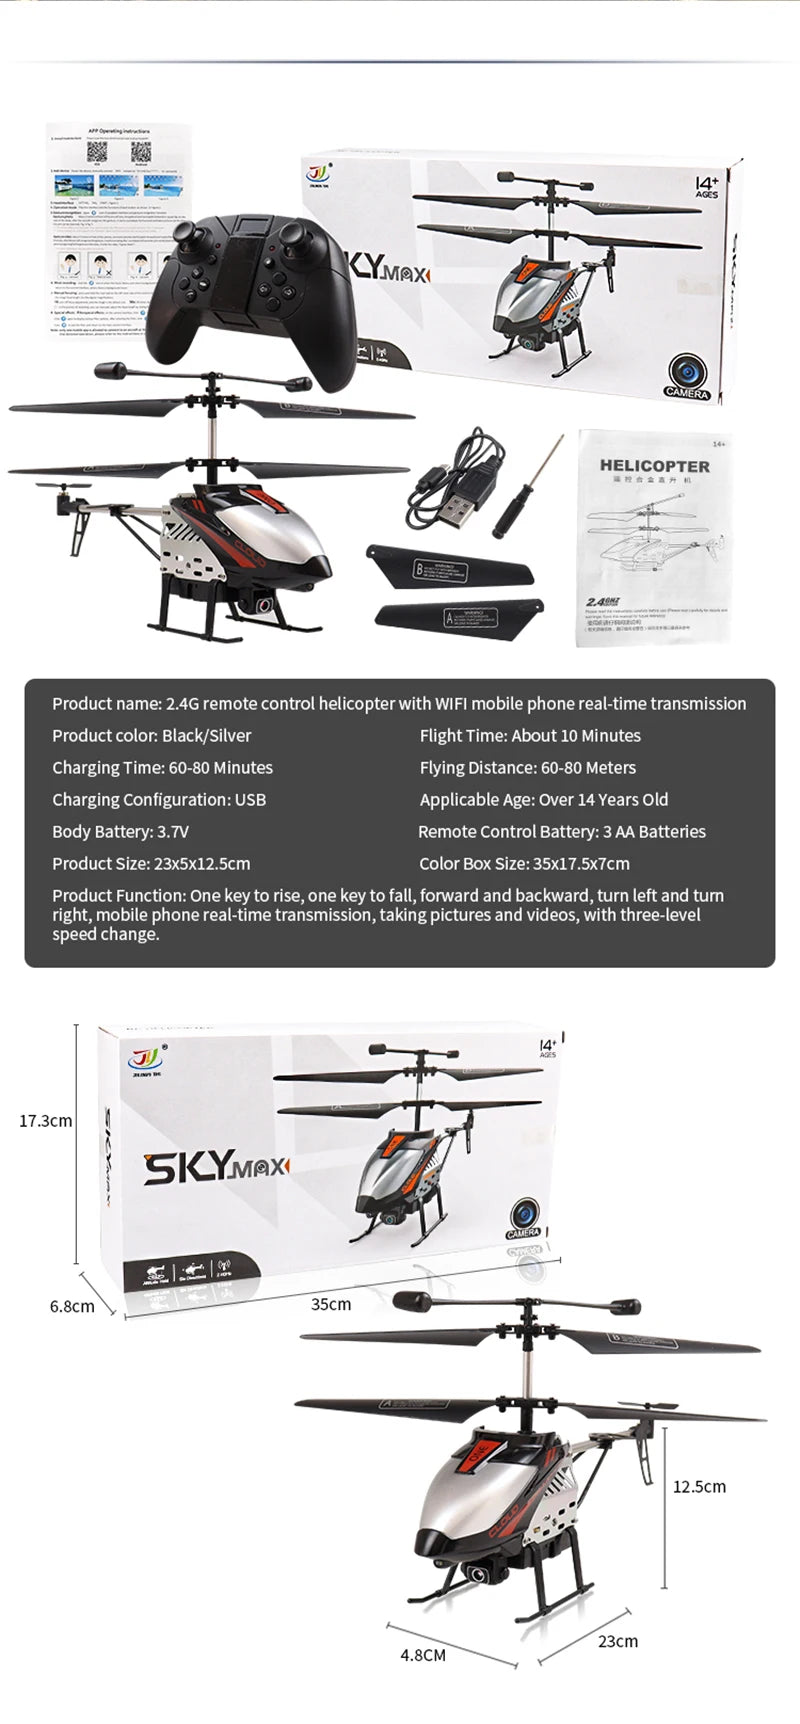 2.4G remote control helicopter with WIFI mobile phone real-time transmission .